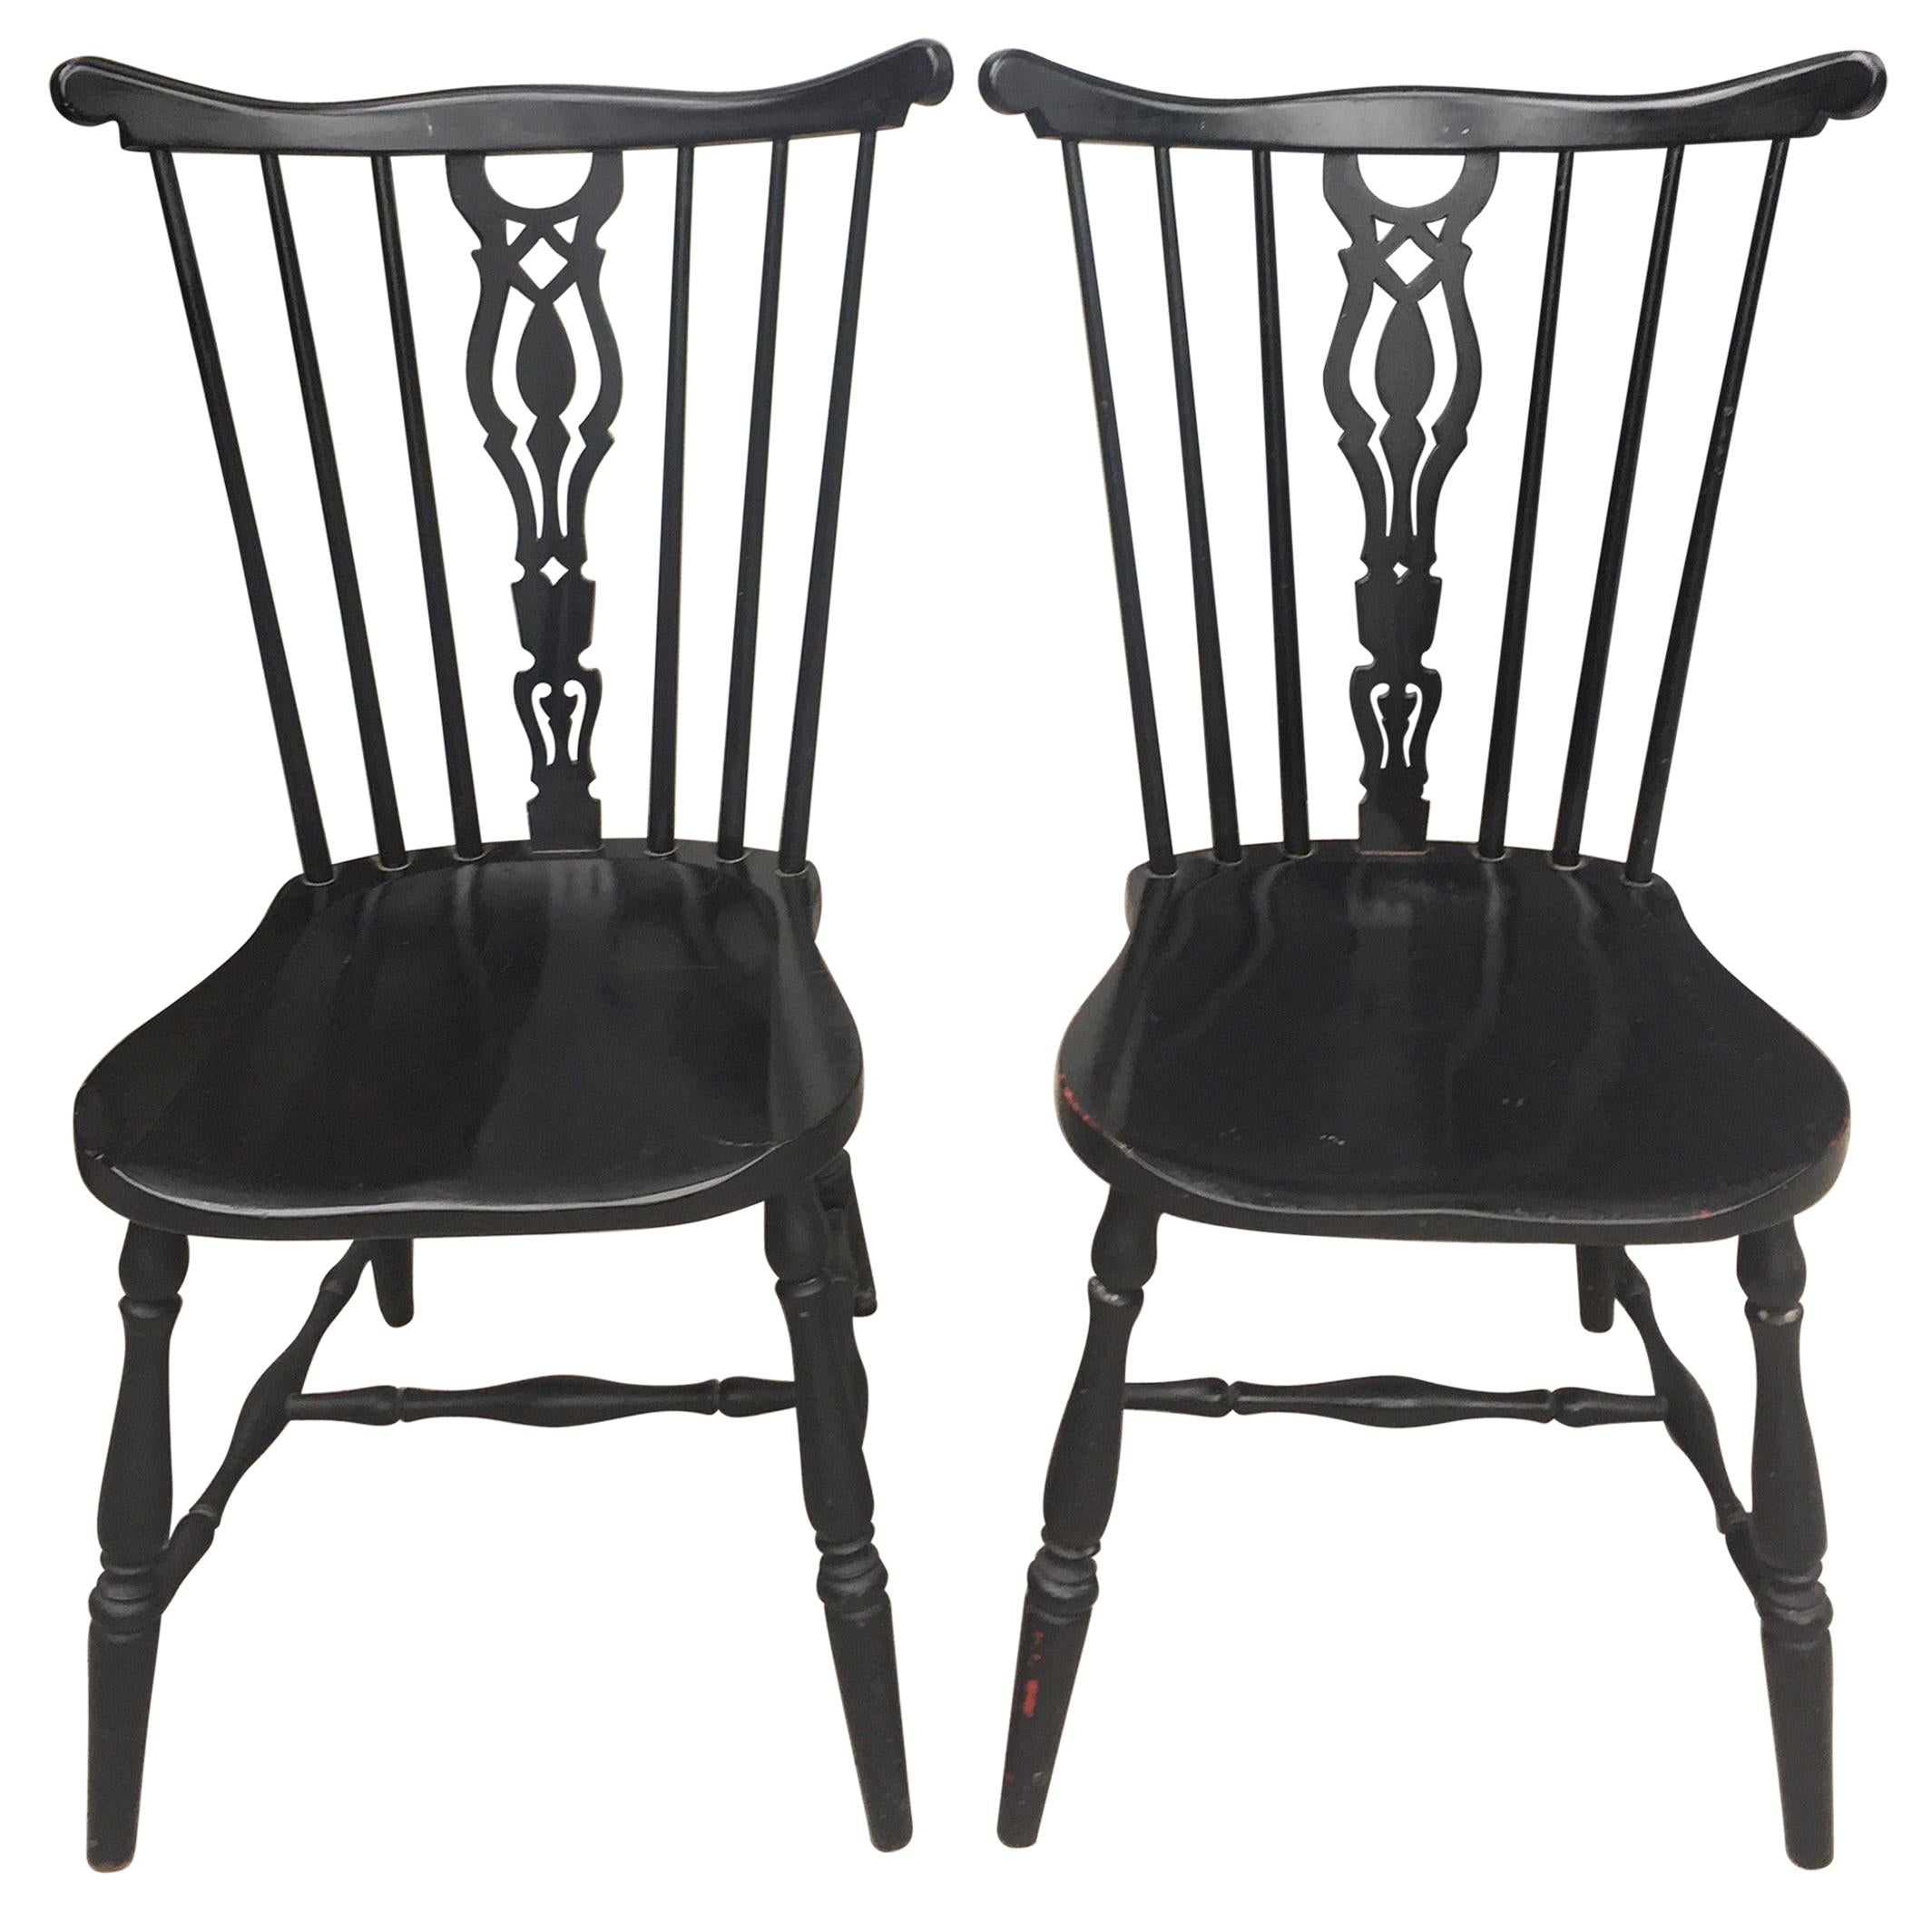 Pair of Black Lacquered Wood Chairs from Gemla Diö, 1950s For Sale